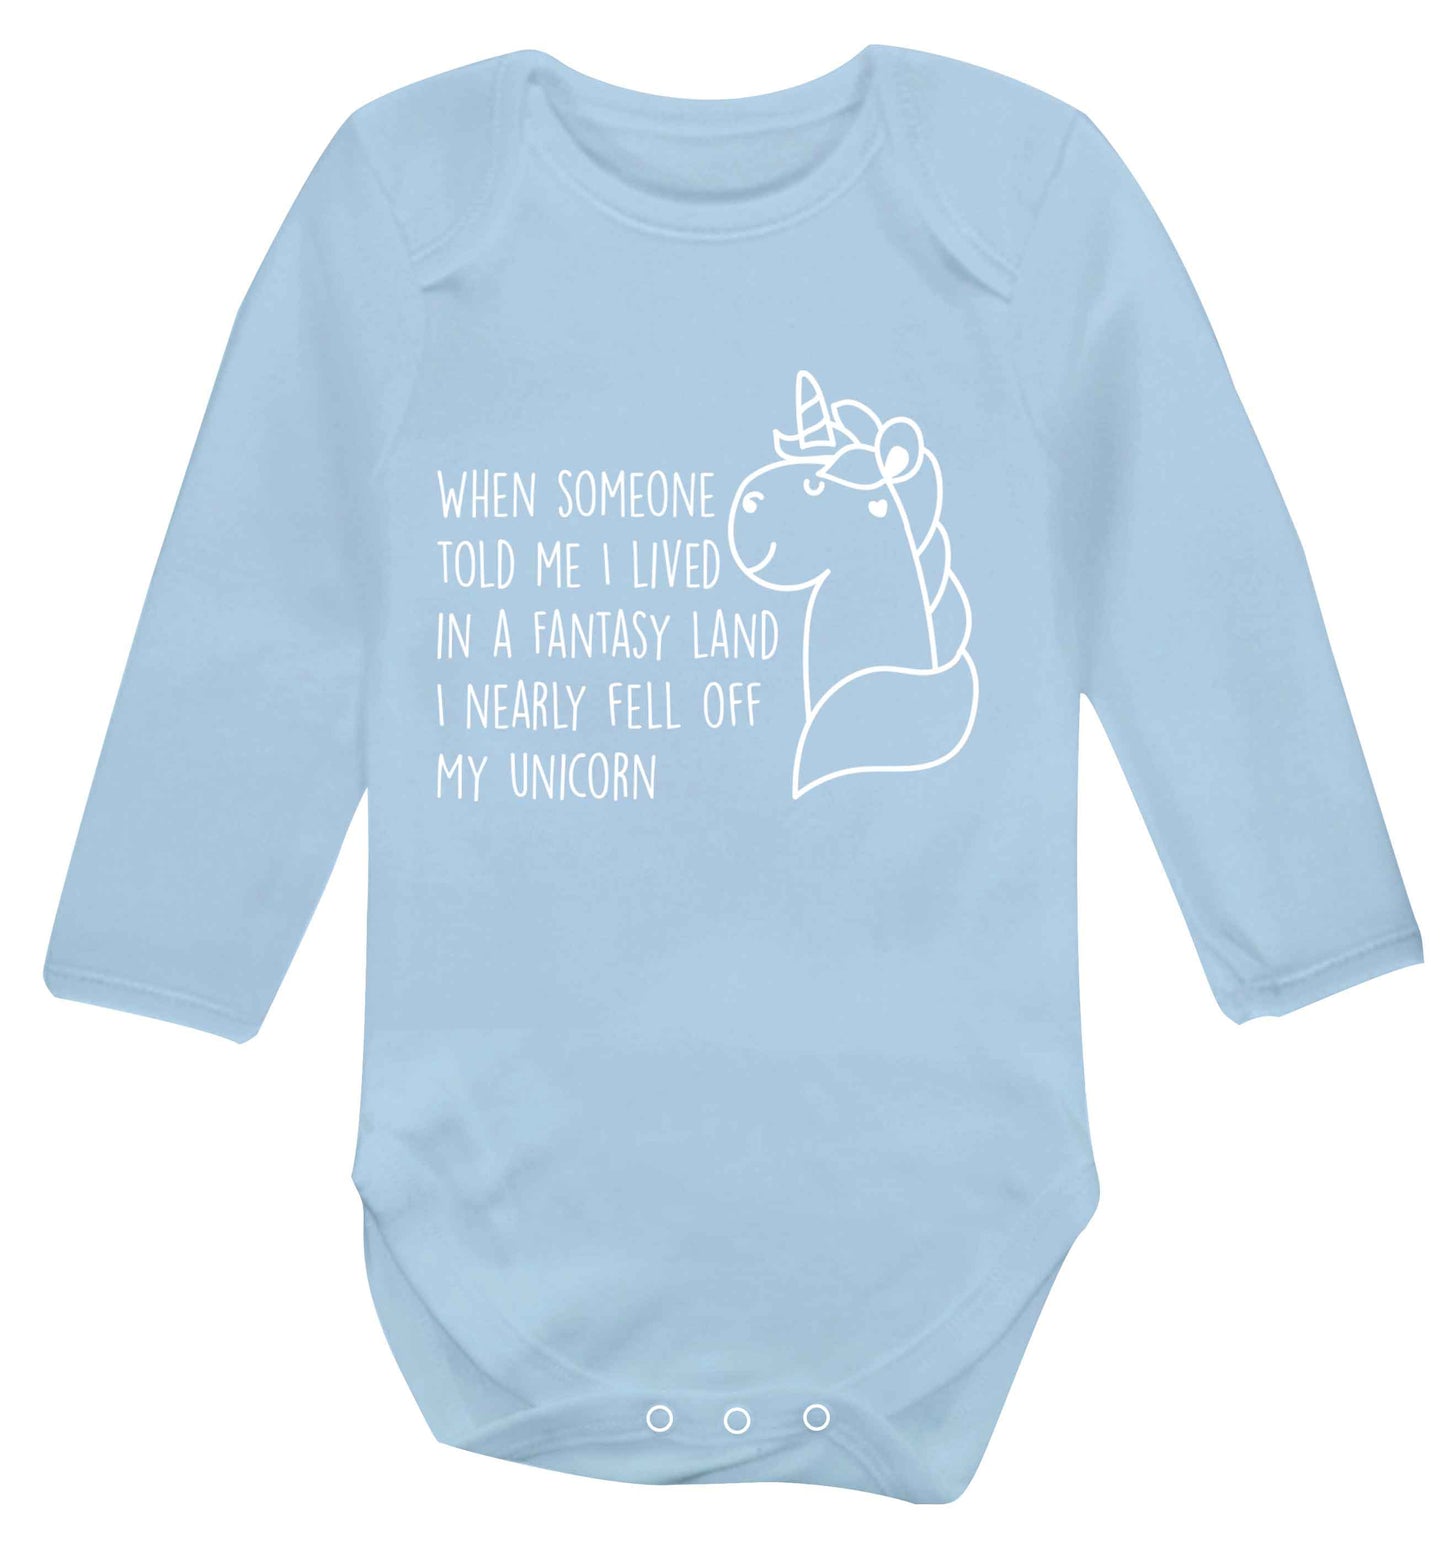 When somebody told me I lived in a fantasy land I nearly fell of my unicorn Baby Vest long sleeved pale blue 6-12 months